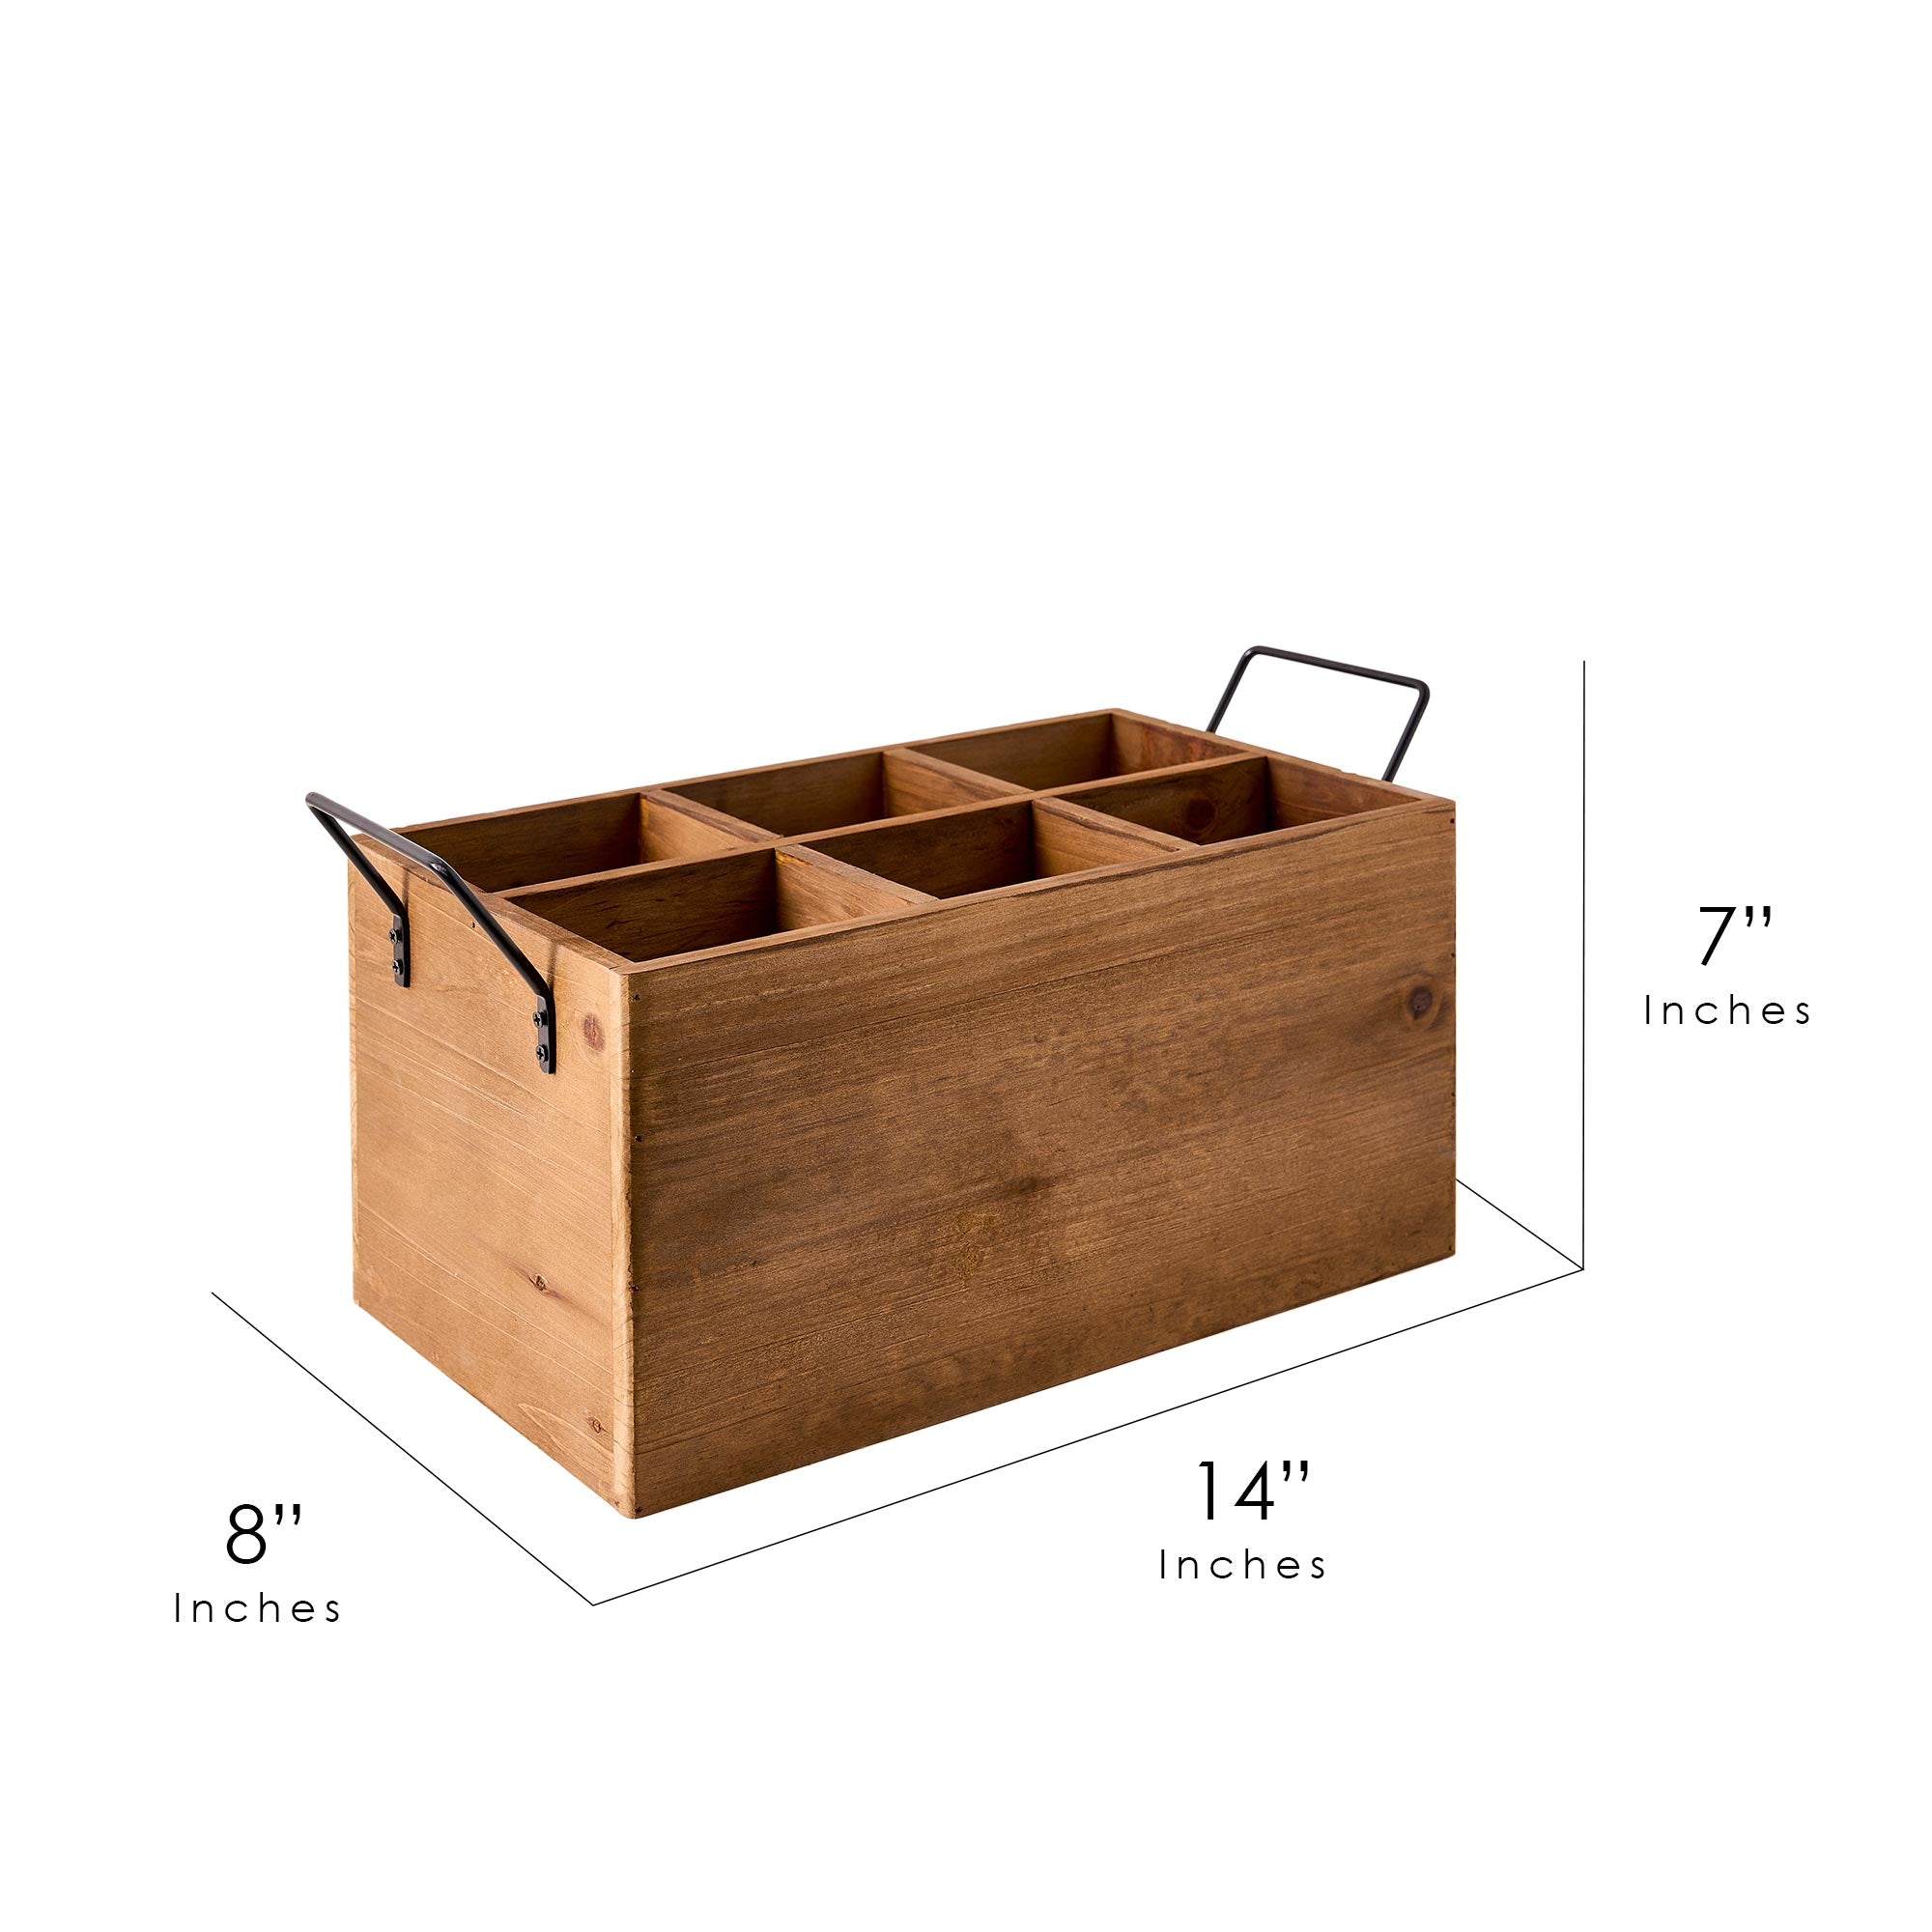 The Speakeasy Wood Crate Bottle Holder with Metal Handles - 7